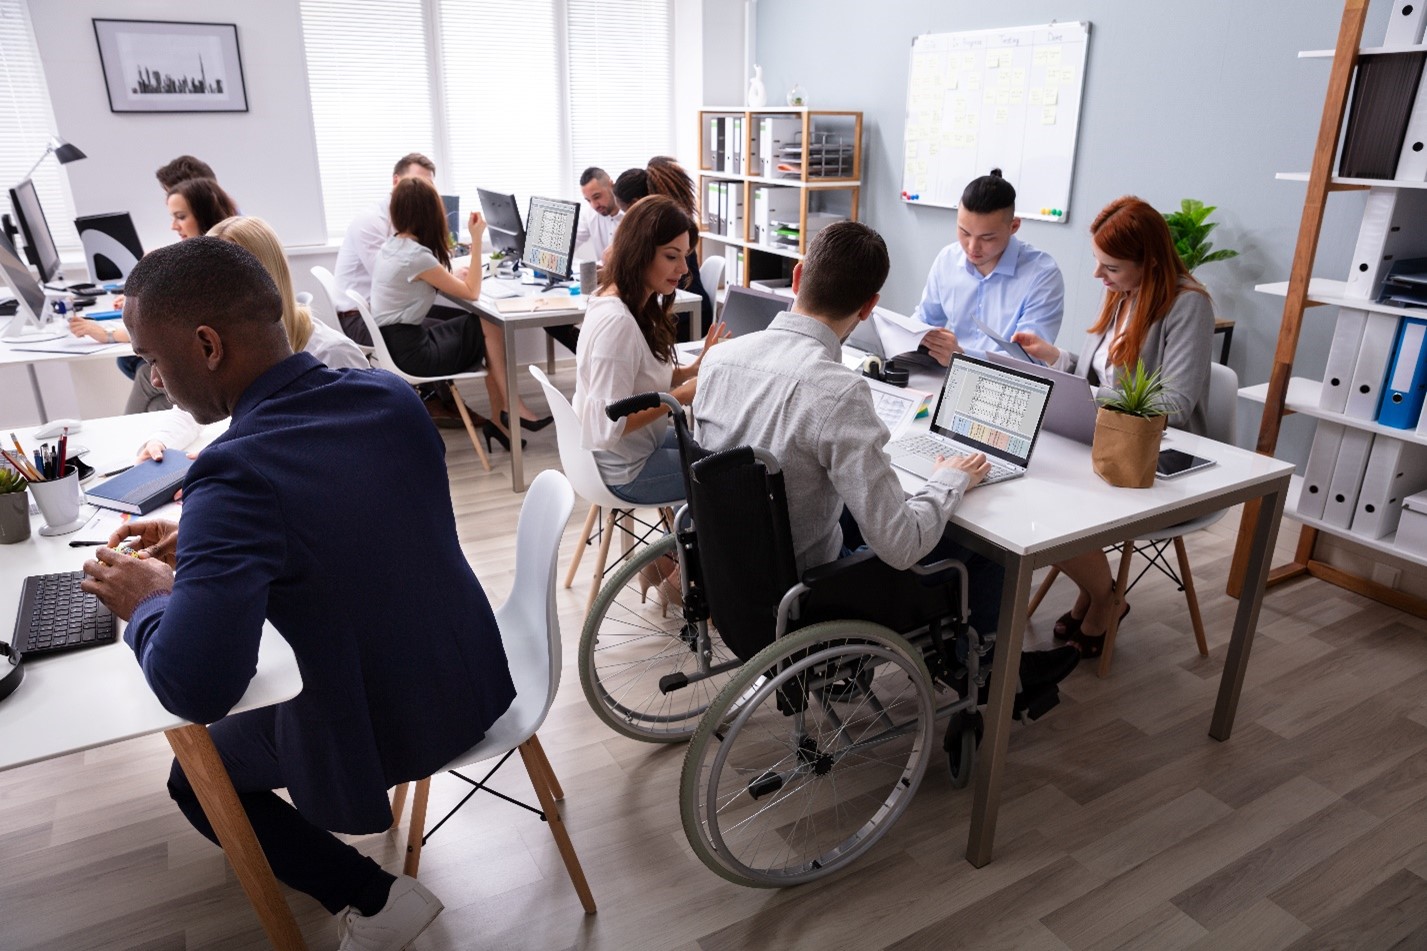 Amy Waninger: Hiring People with Disabilities